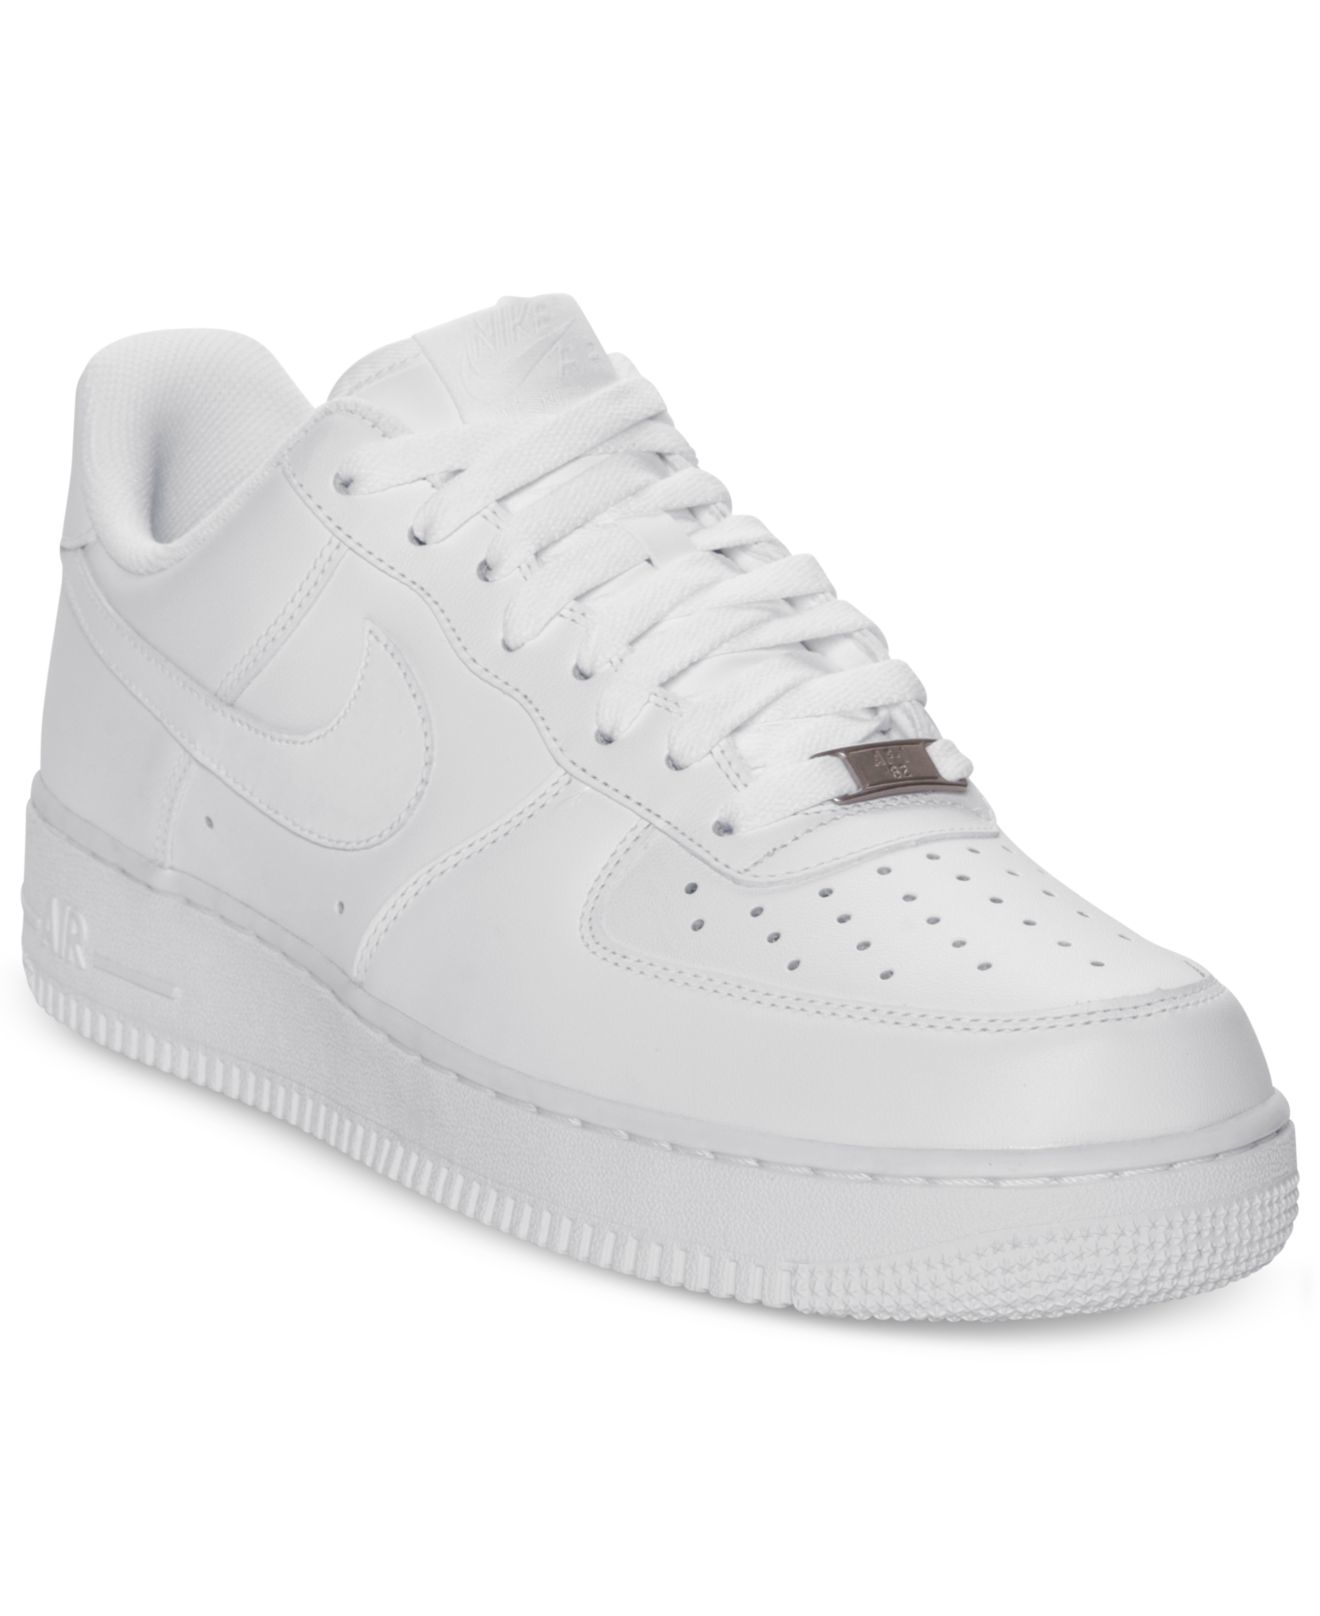 finish line air forces